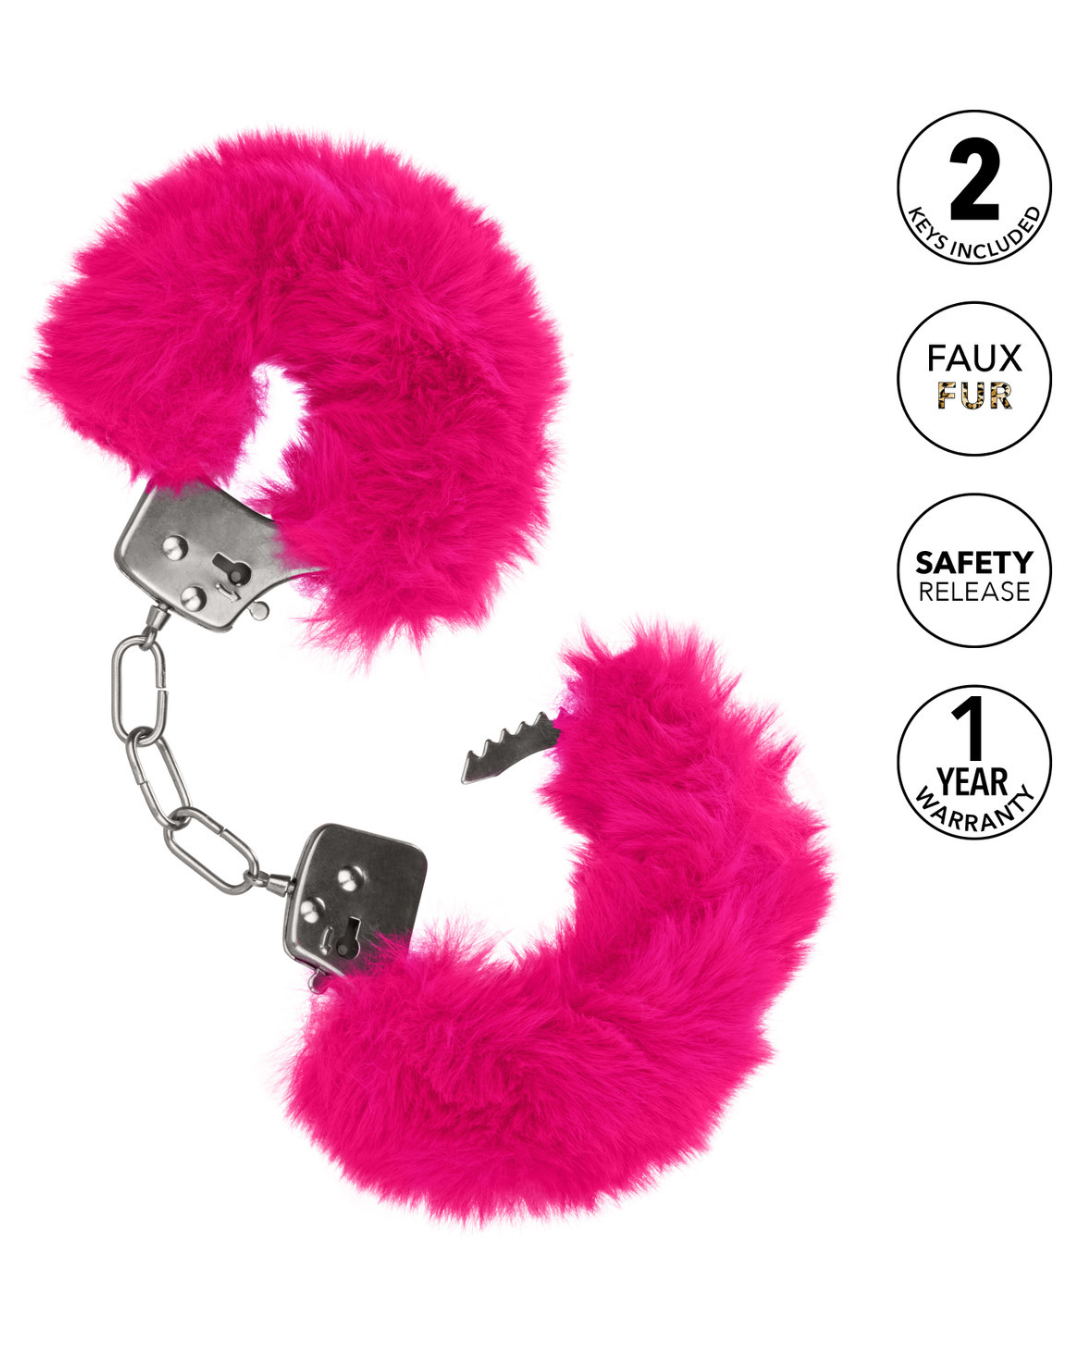 Ultra Fluffy Furry Cuffs - Pink locked and unlocked with additional features to the right